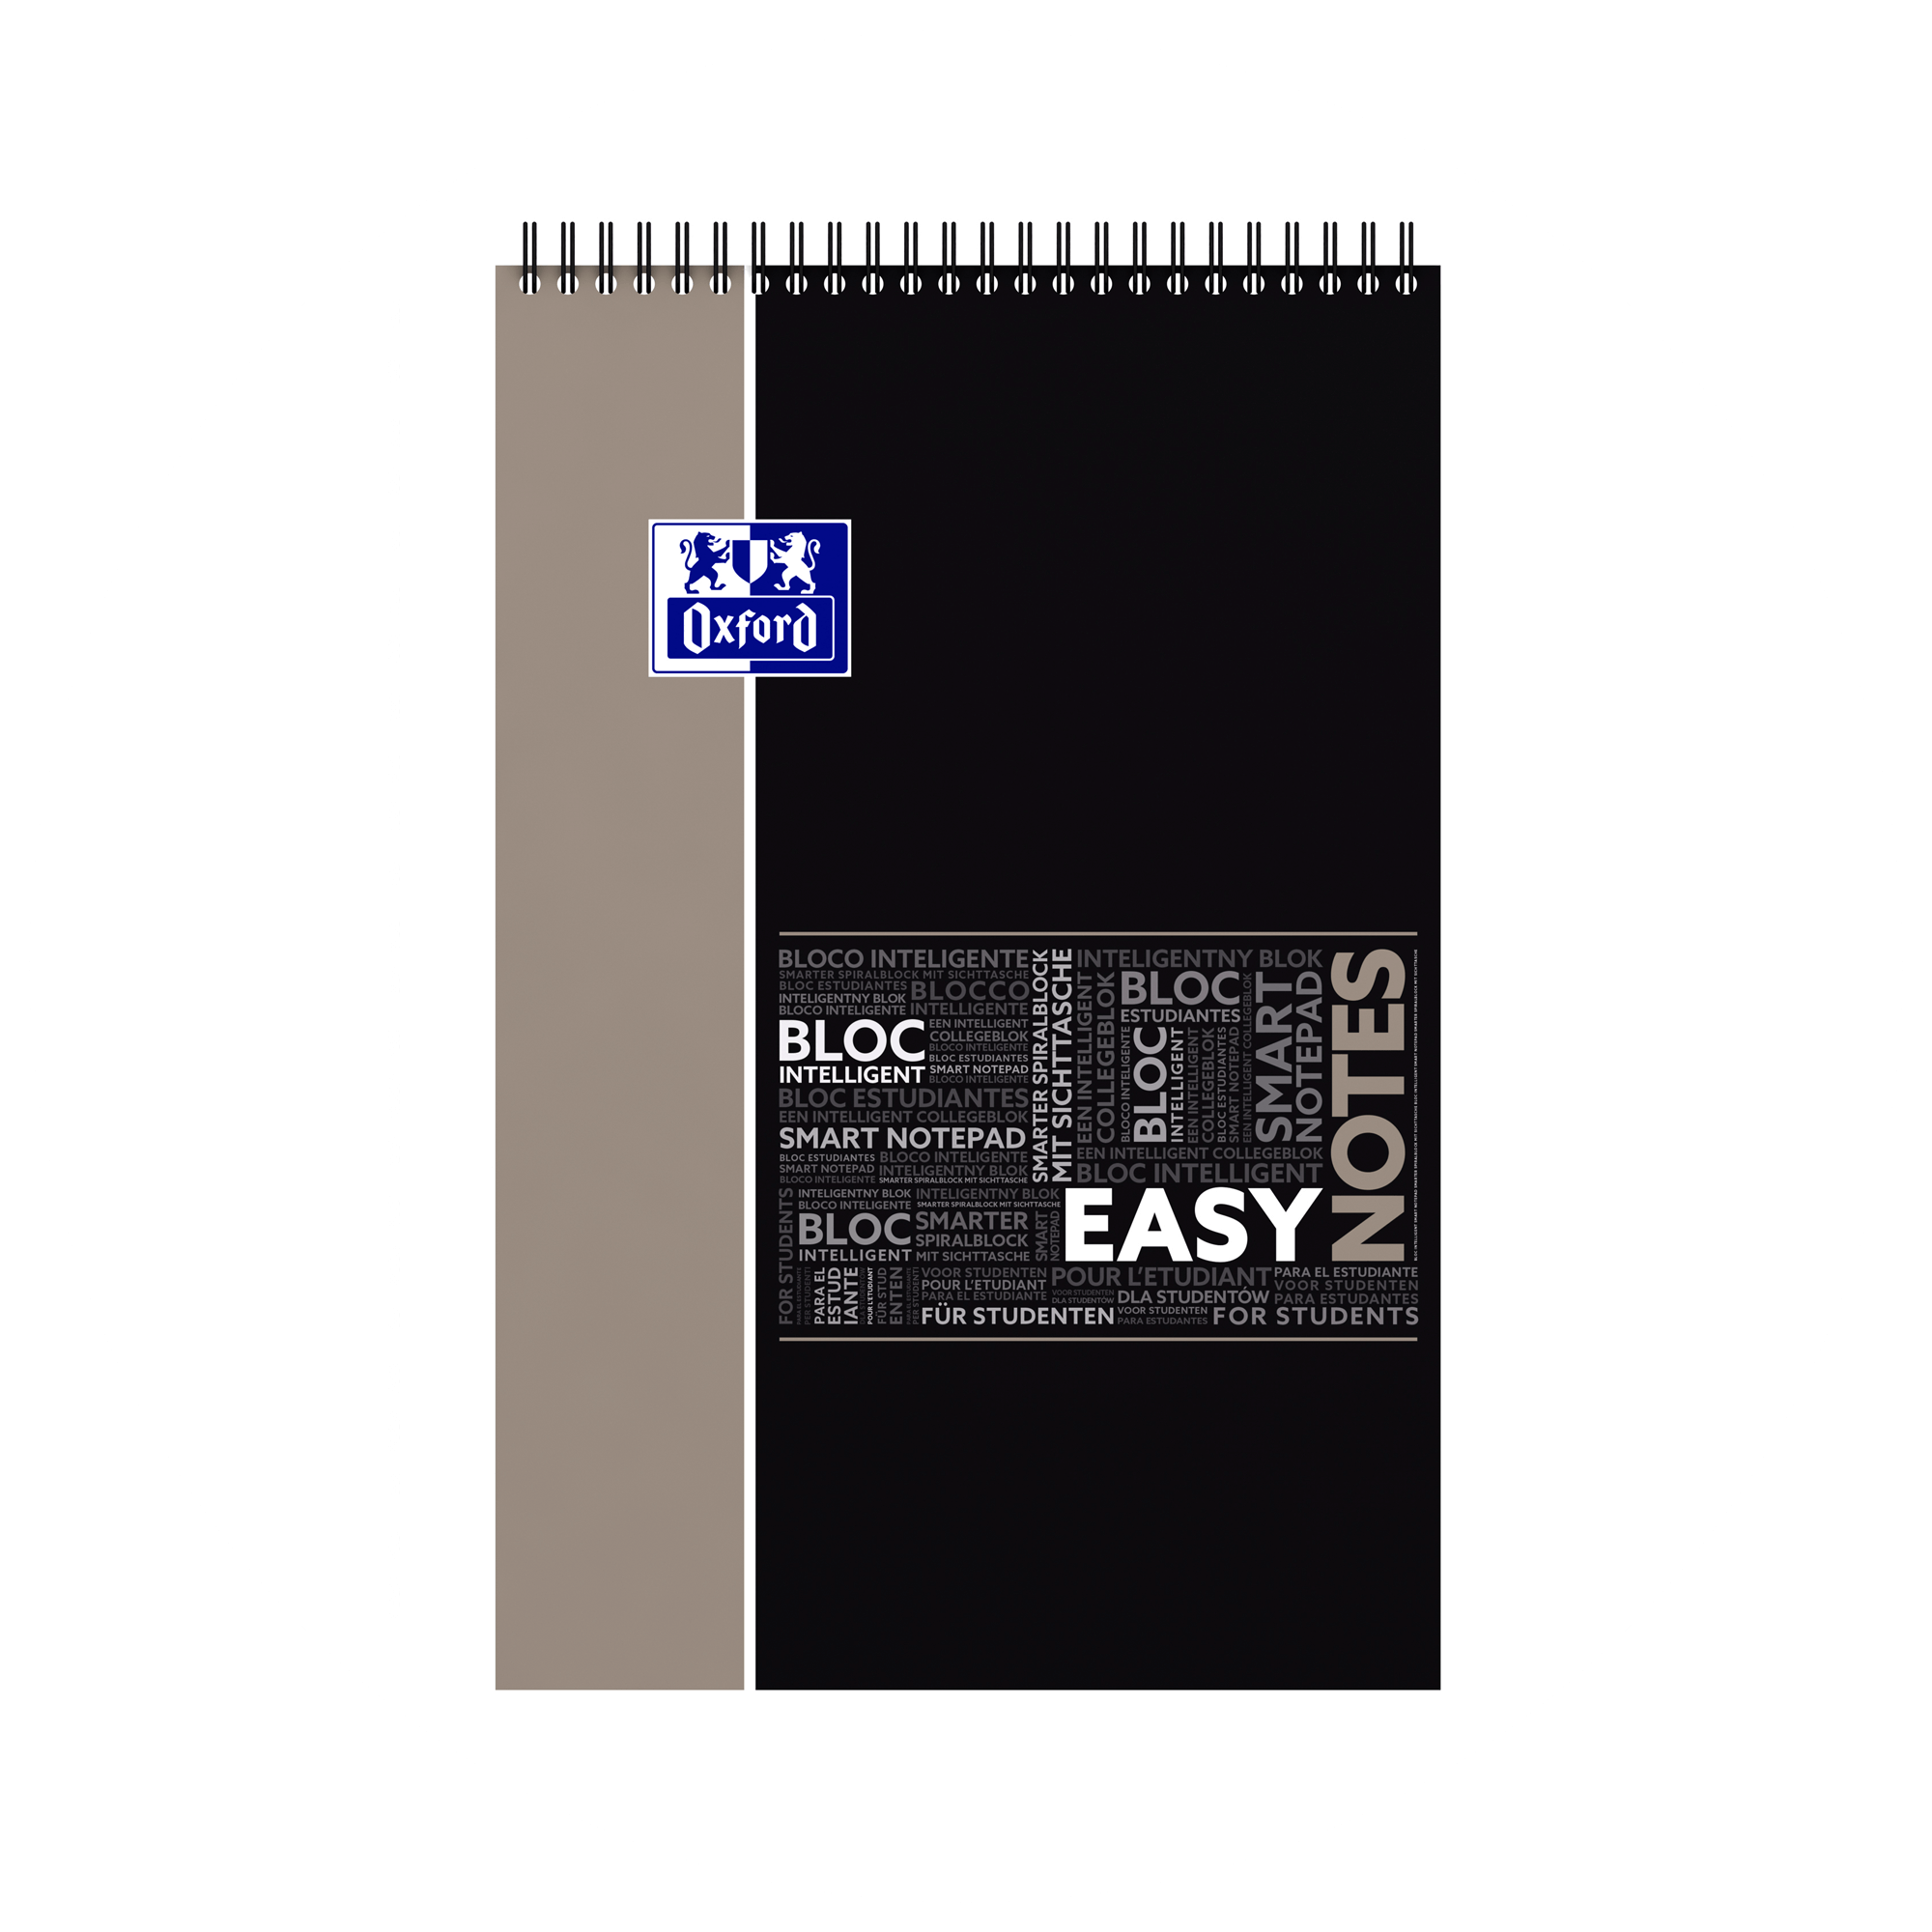 Oxford student easynotes